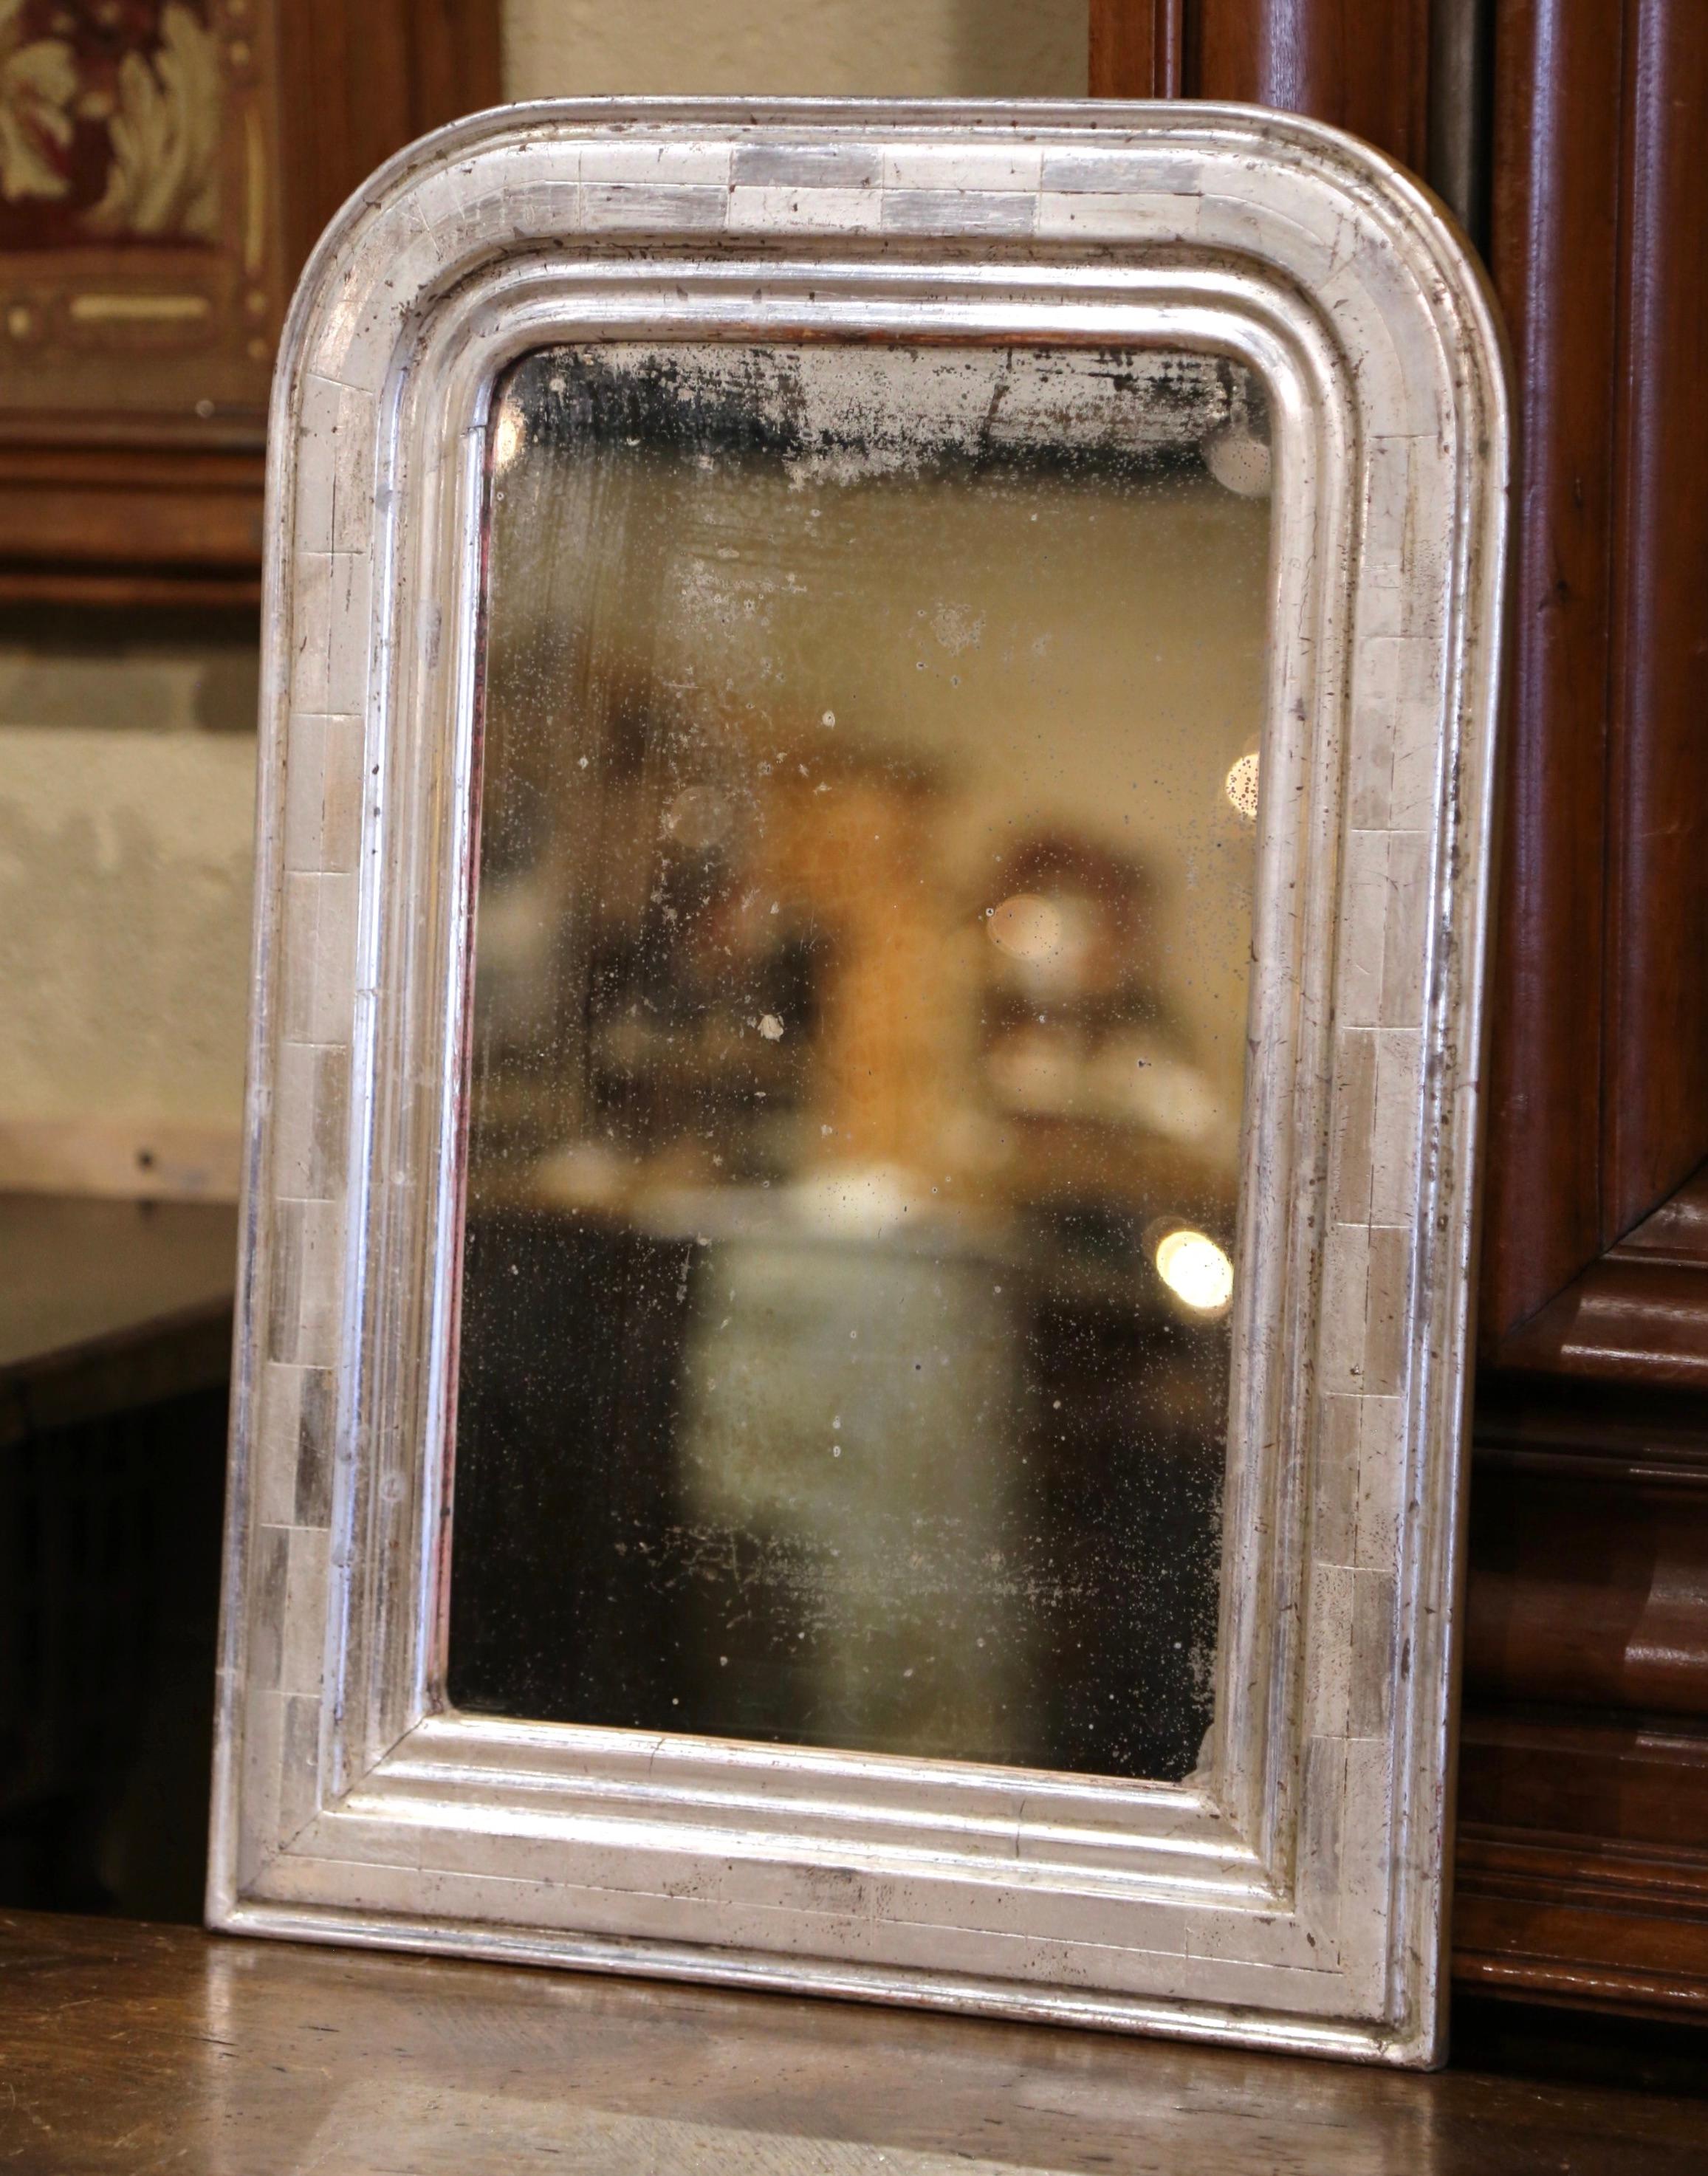 Crafted in the Burgundy region of France, circa 1870, the small antique mirror has traditional, timeless lines with rounded corners. The elegant frame is decorated with a luxurious silver leaf finish, further embellished with an engraved two-tone